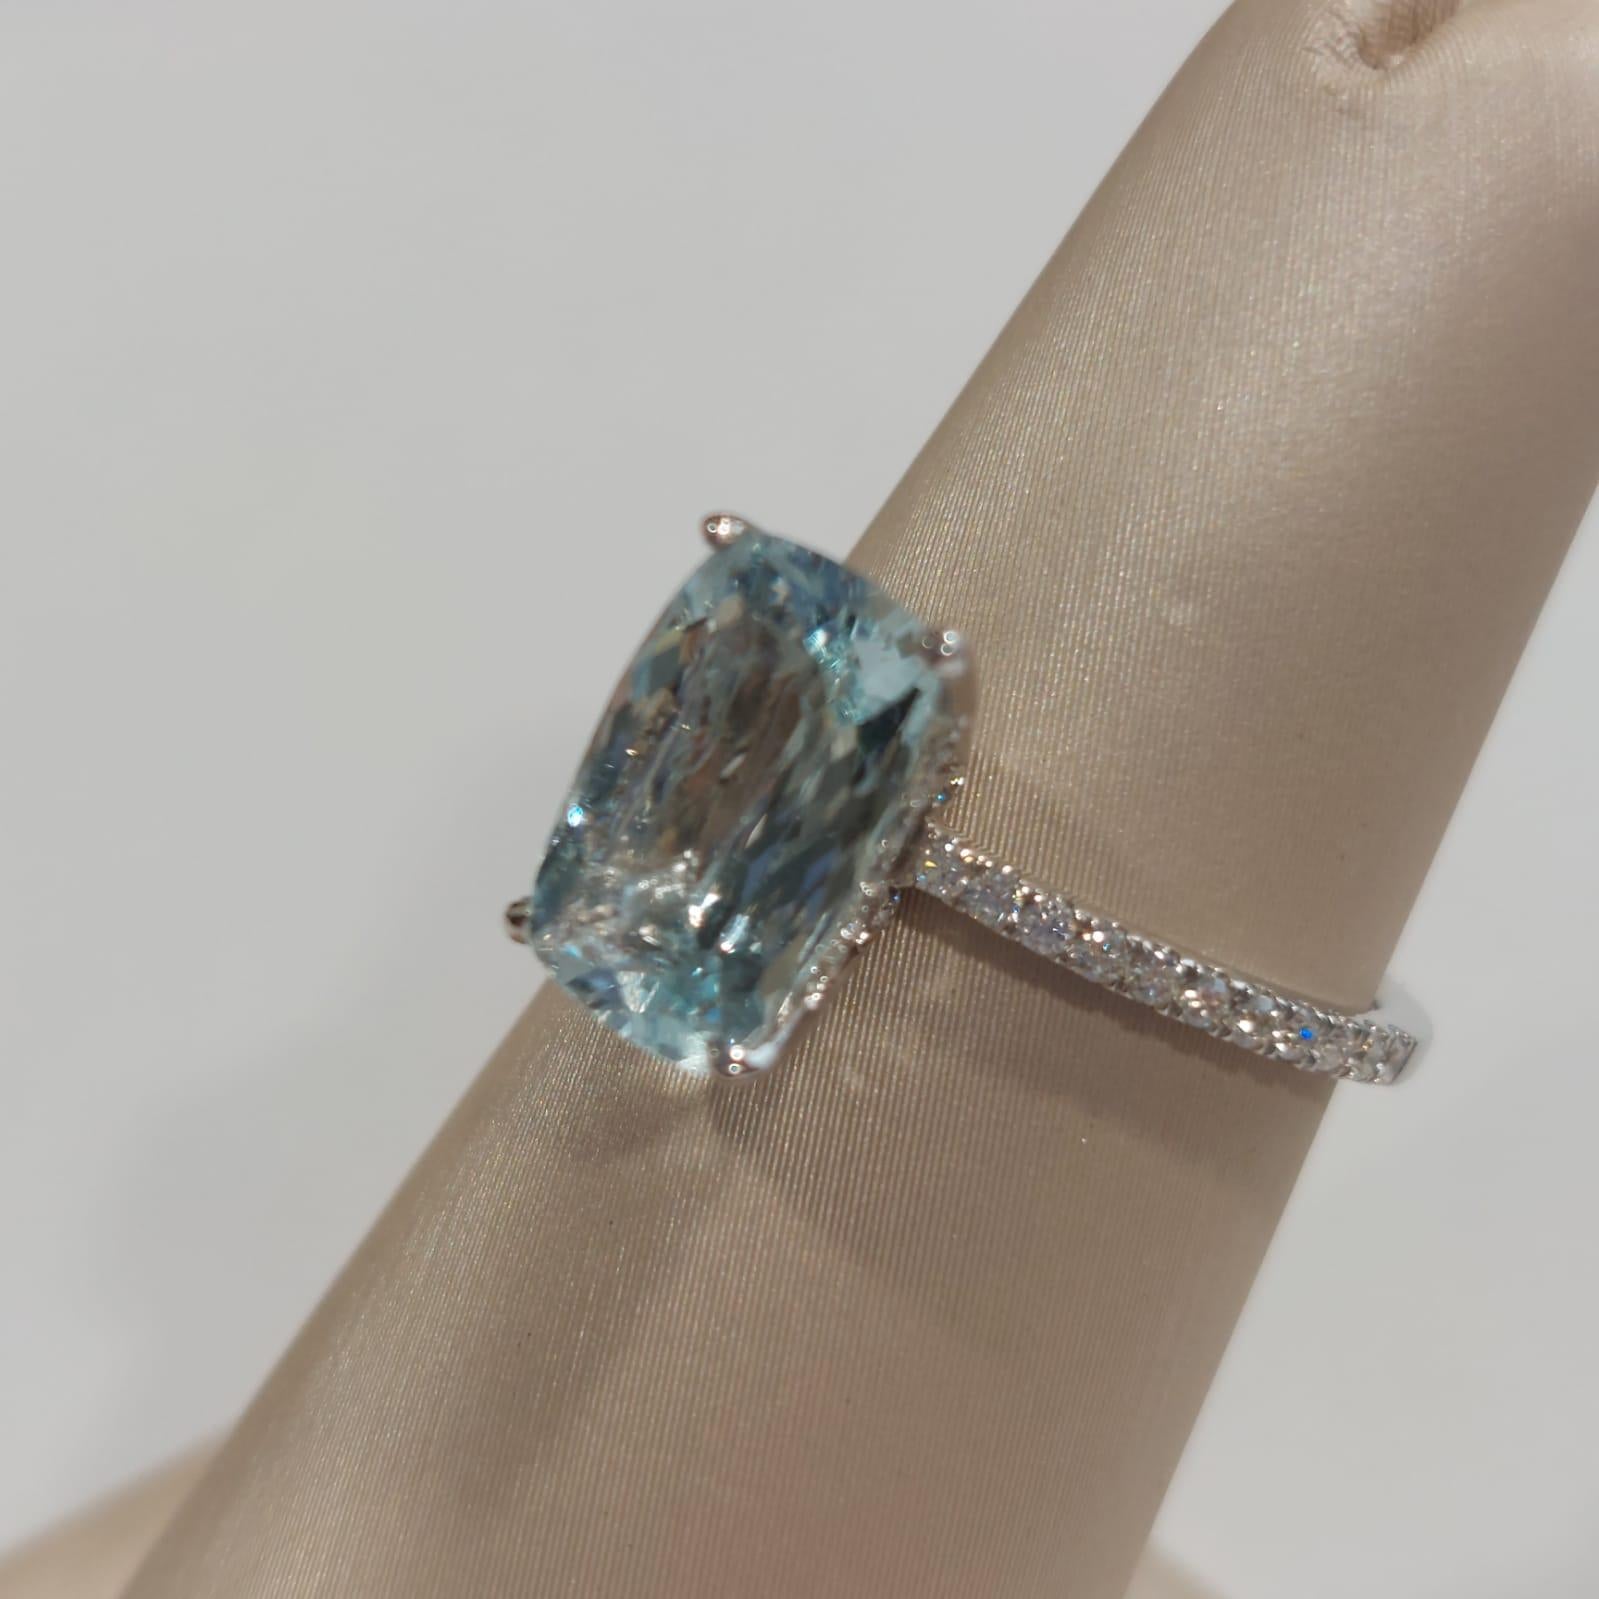 Aquamarine Ring sometimes called the “mermaid stone,” aquamarine adds a sea-like sparkle to any wedding or engagement ring.

The Centre Aquamarine weighs 1.97 Carat, with 0.28 Carat of diamonds beautifully set around it. The ring is made in 18K